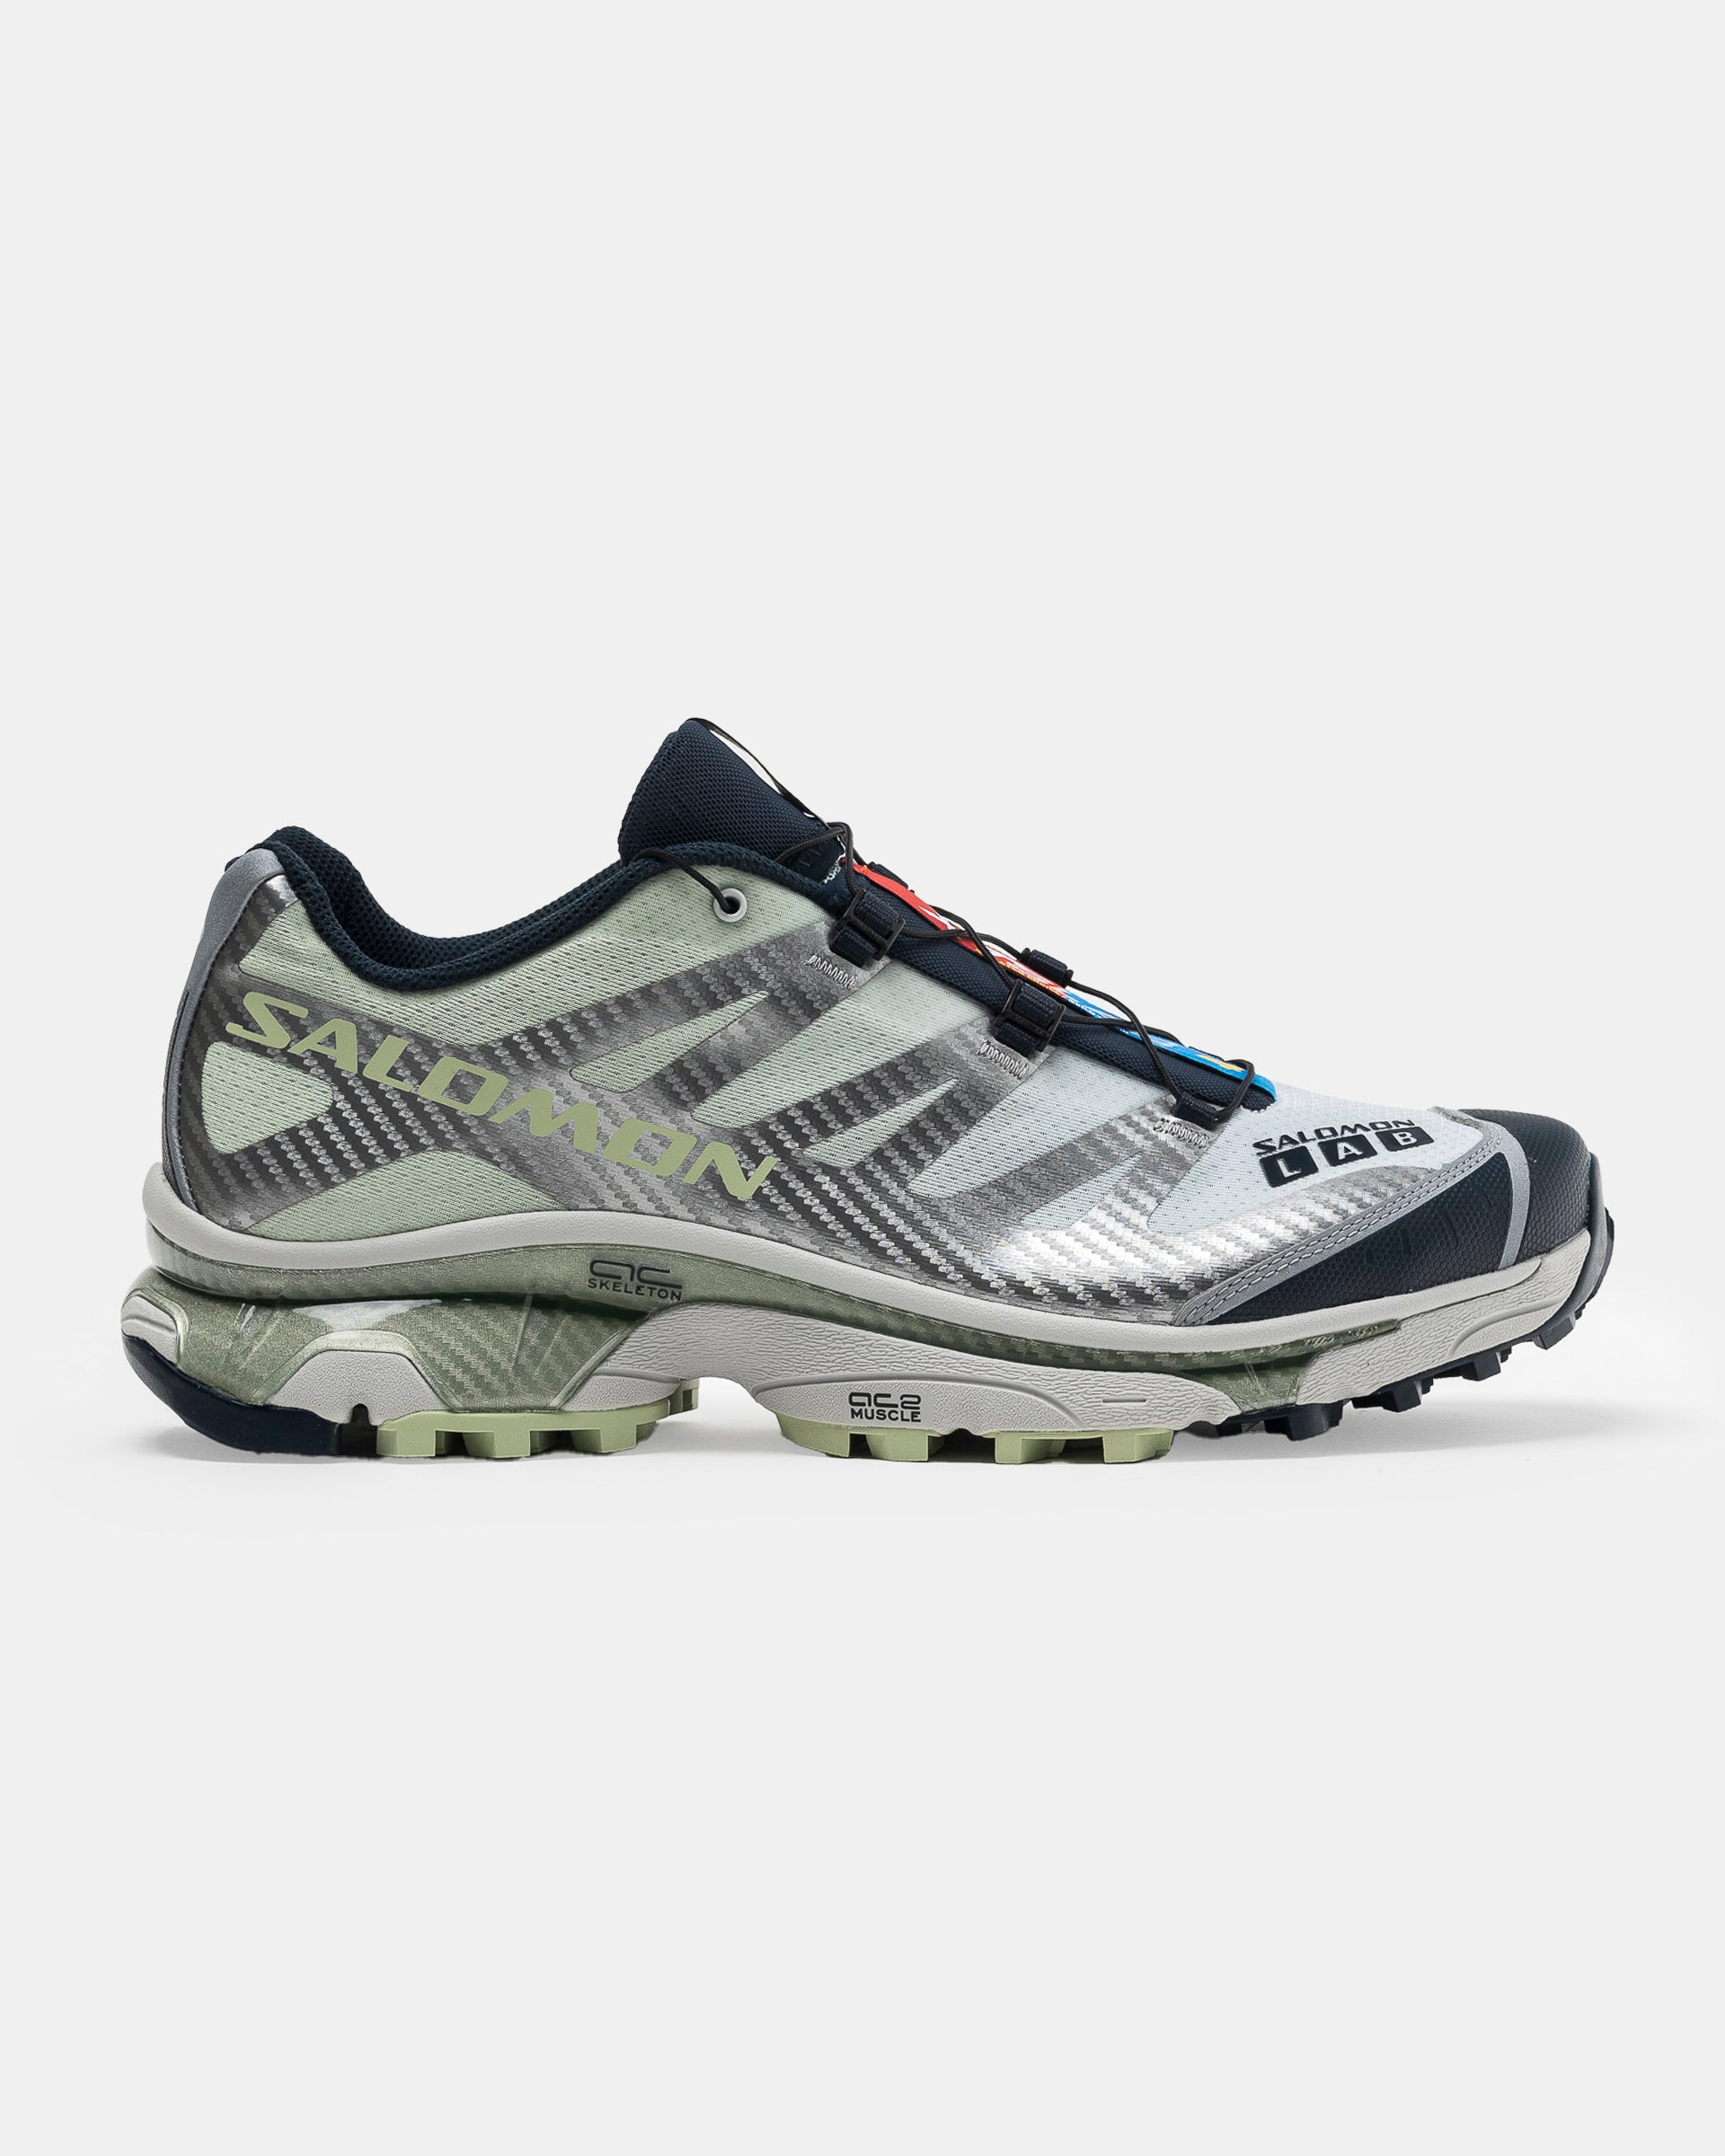 Salomon XT-4 OG in Carbon, Celadon Green, and Silver on the white background.